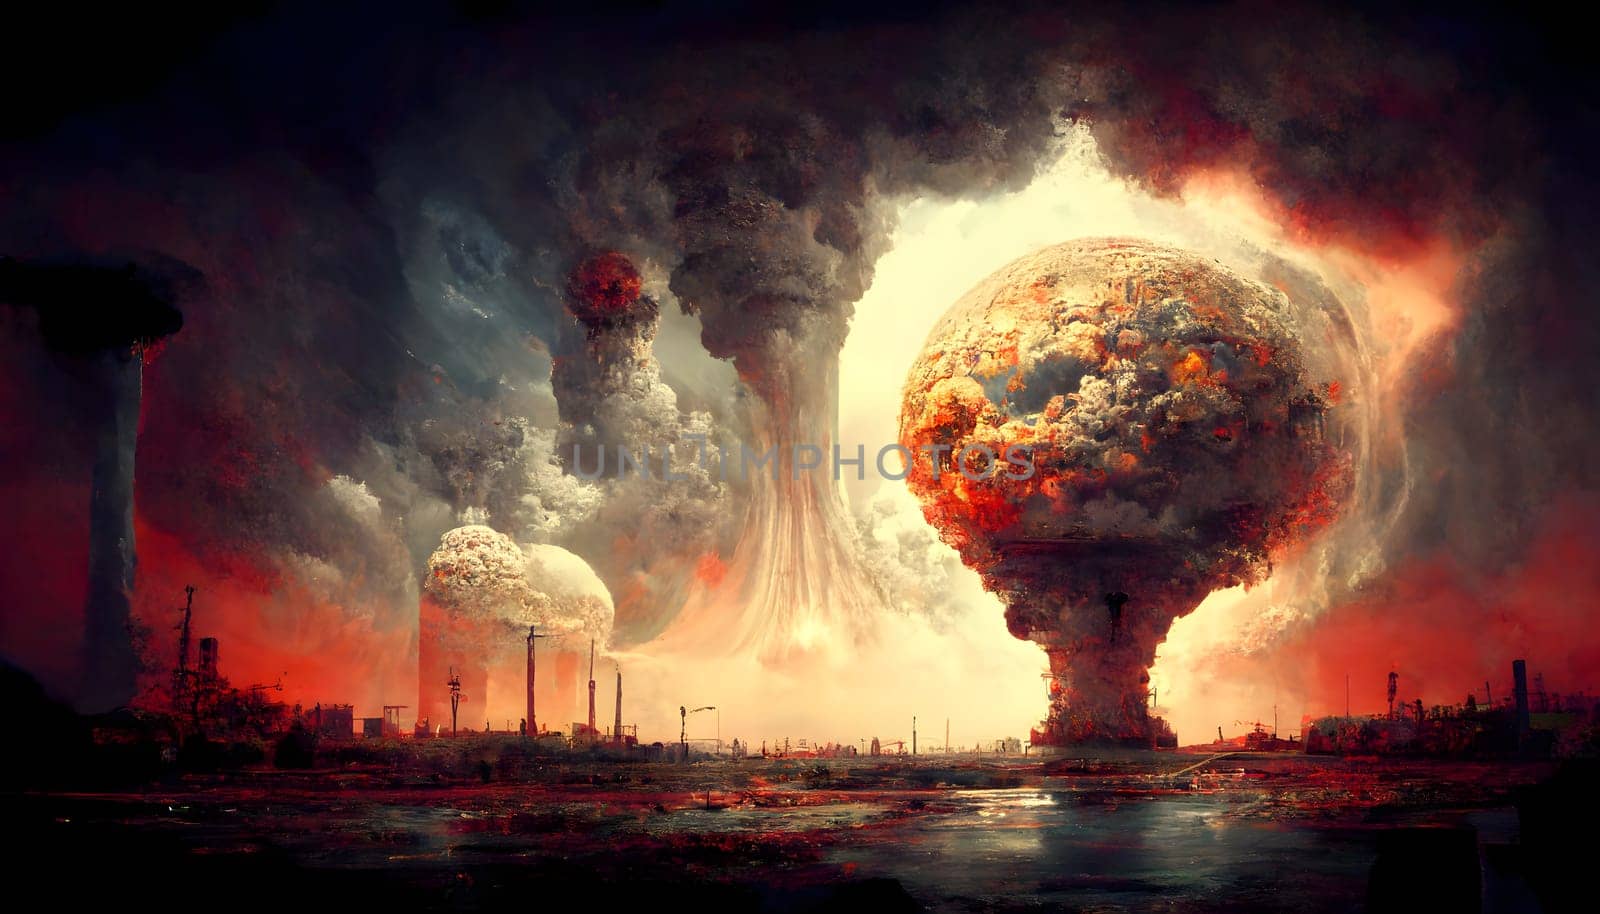 nuclear war, apocalyptic mushroom cloud above city, neural network generated art. Digitally generated image. Not based on any actual scene or pattern.